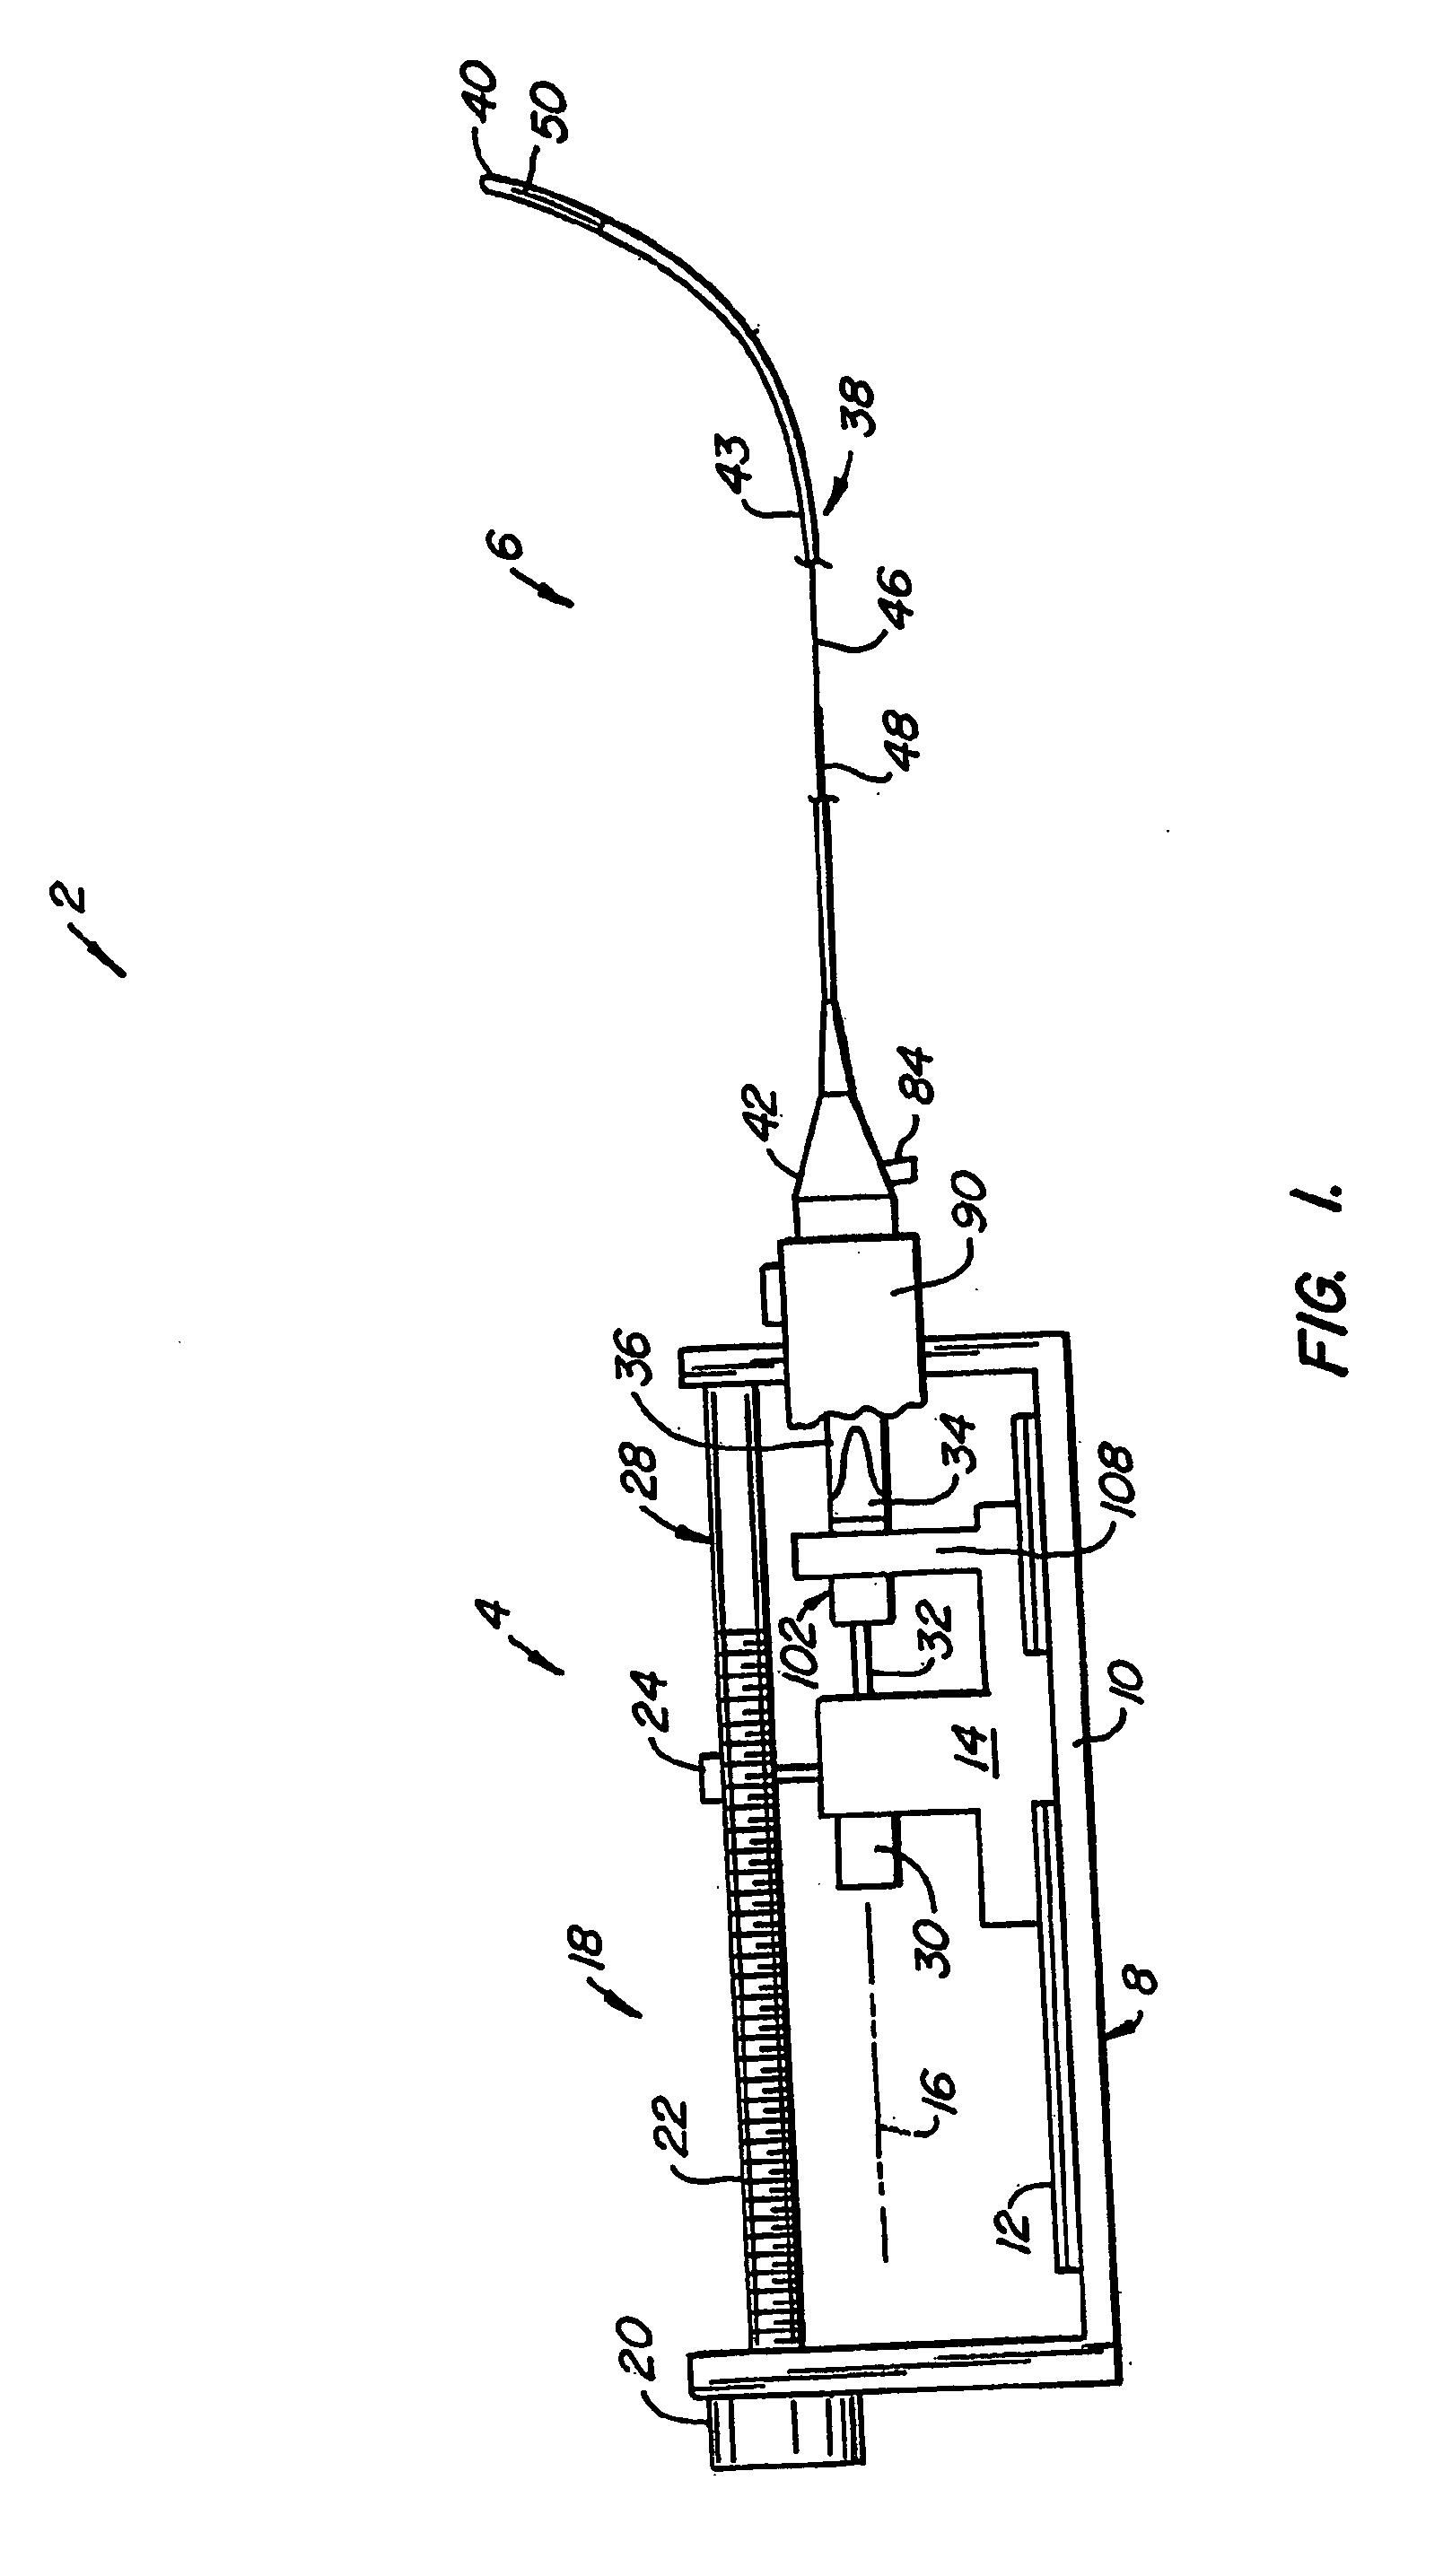 Automatic/manual longitudinal position translator and rotary drive system for catheters